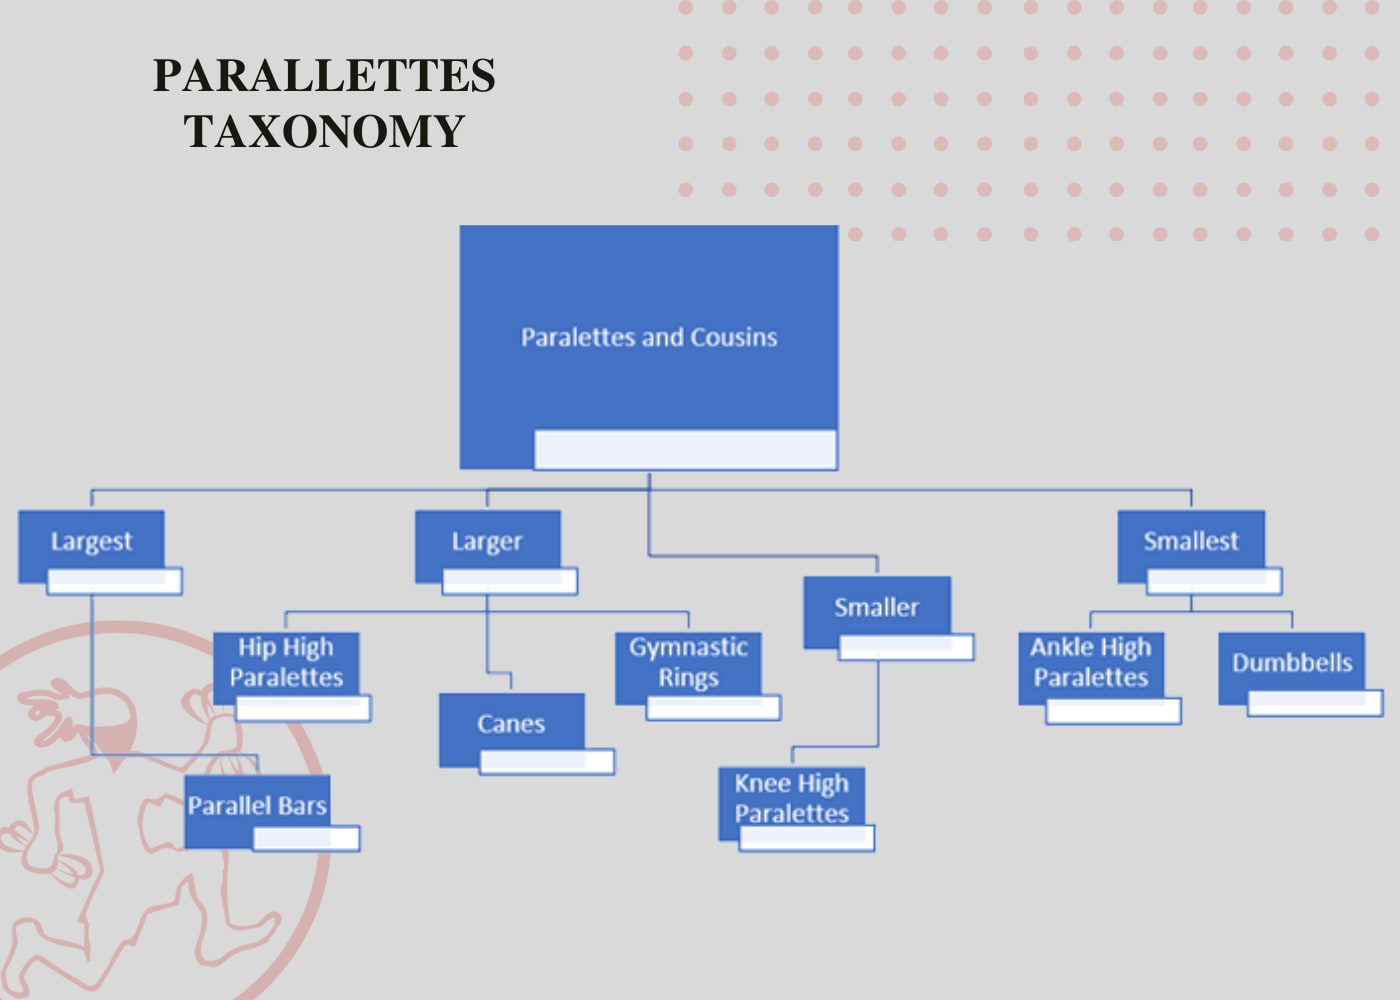 Parallettes Taxonomy